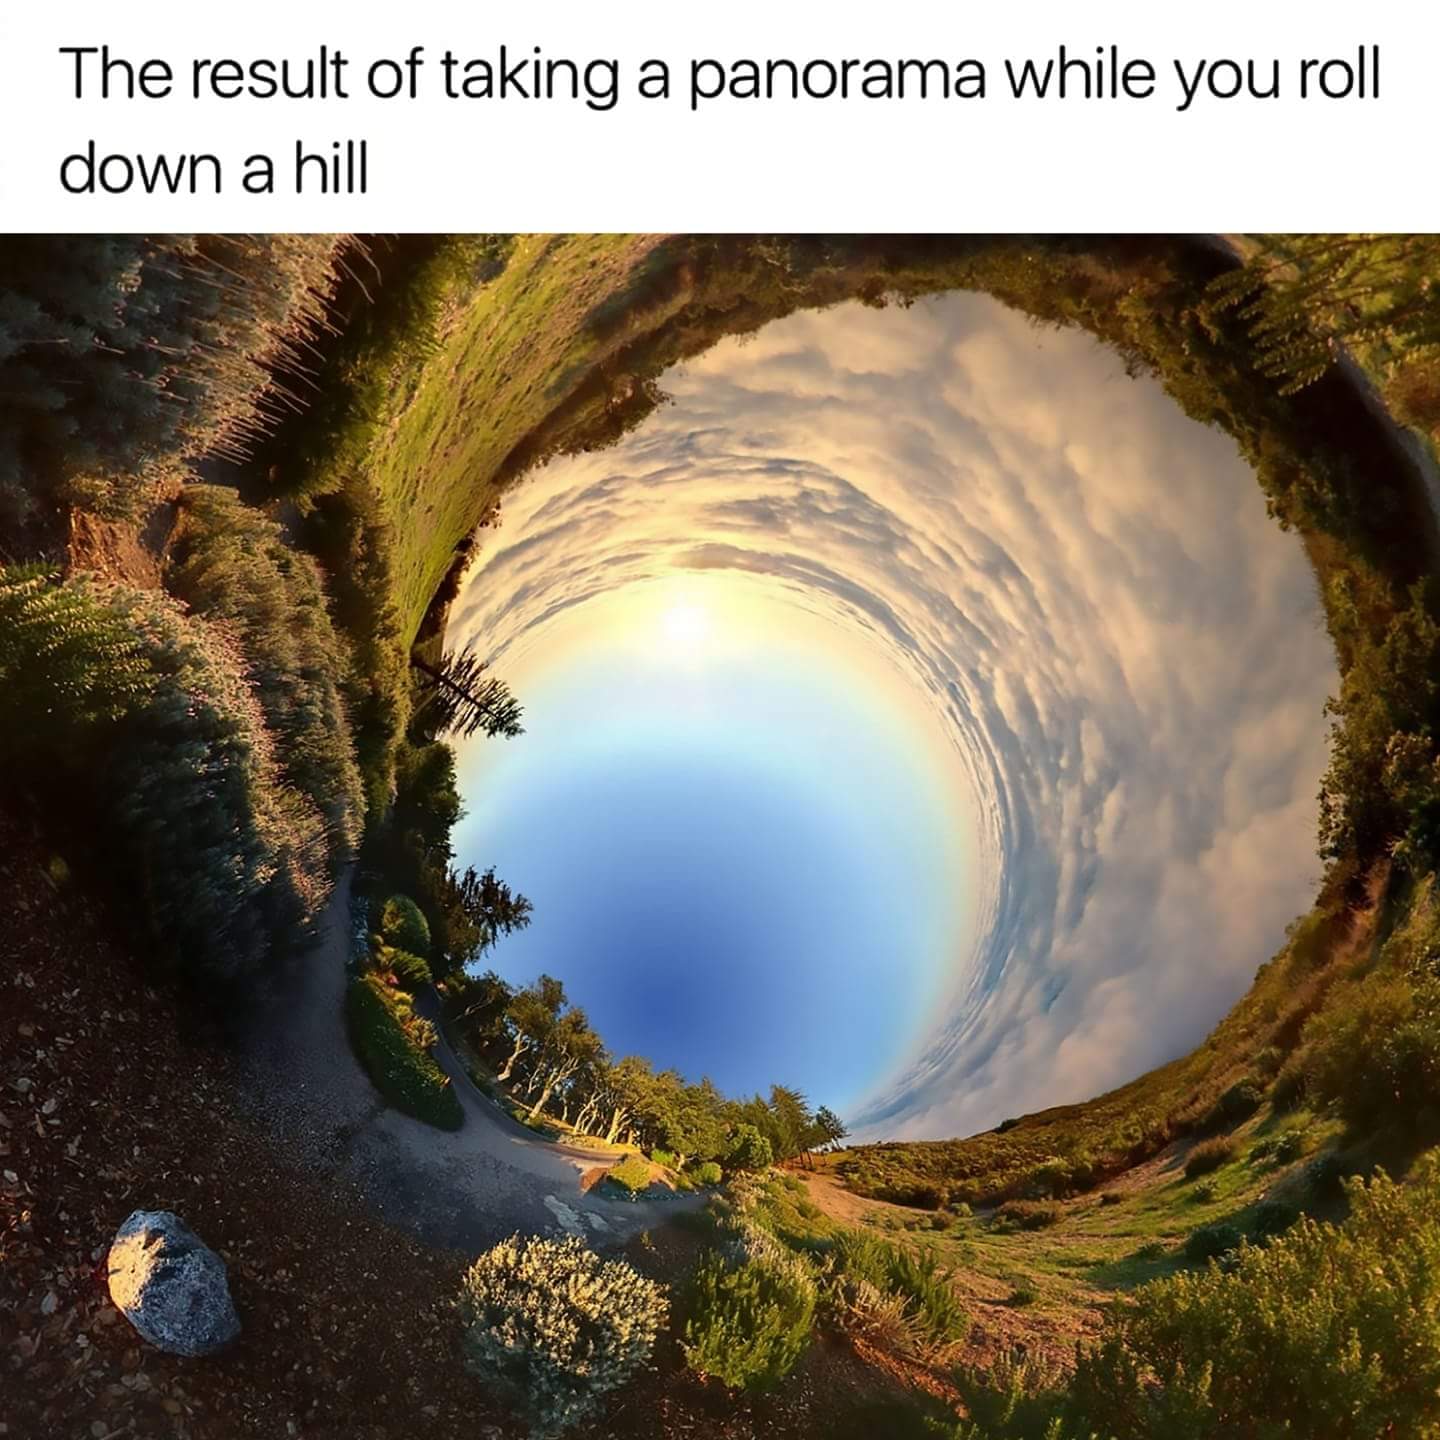 panorama while rolling down a hill - The result of taking a panorama while you roll down a hill